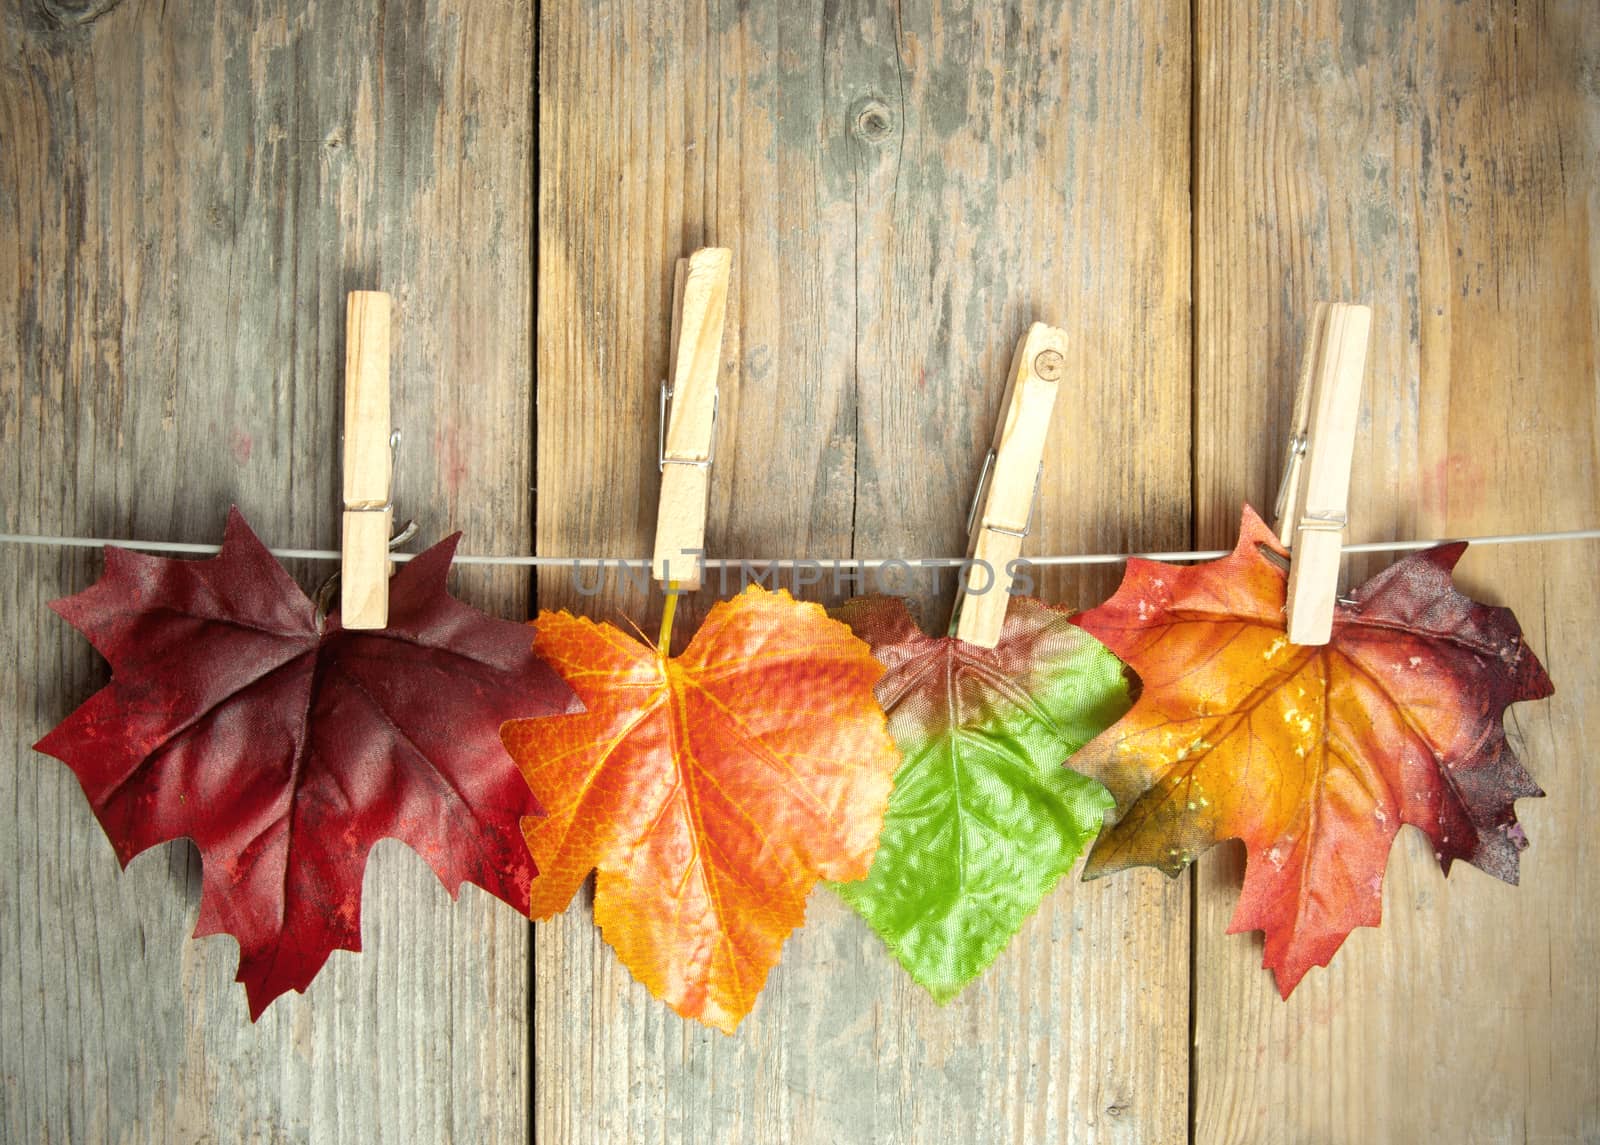 Autumn leave hanging on a clothes line with pegs against a wooden background